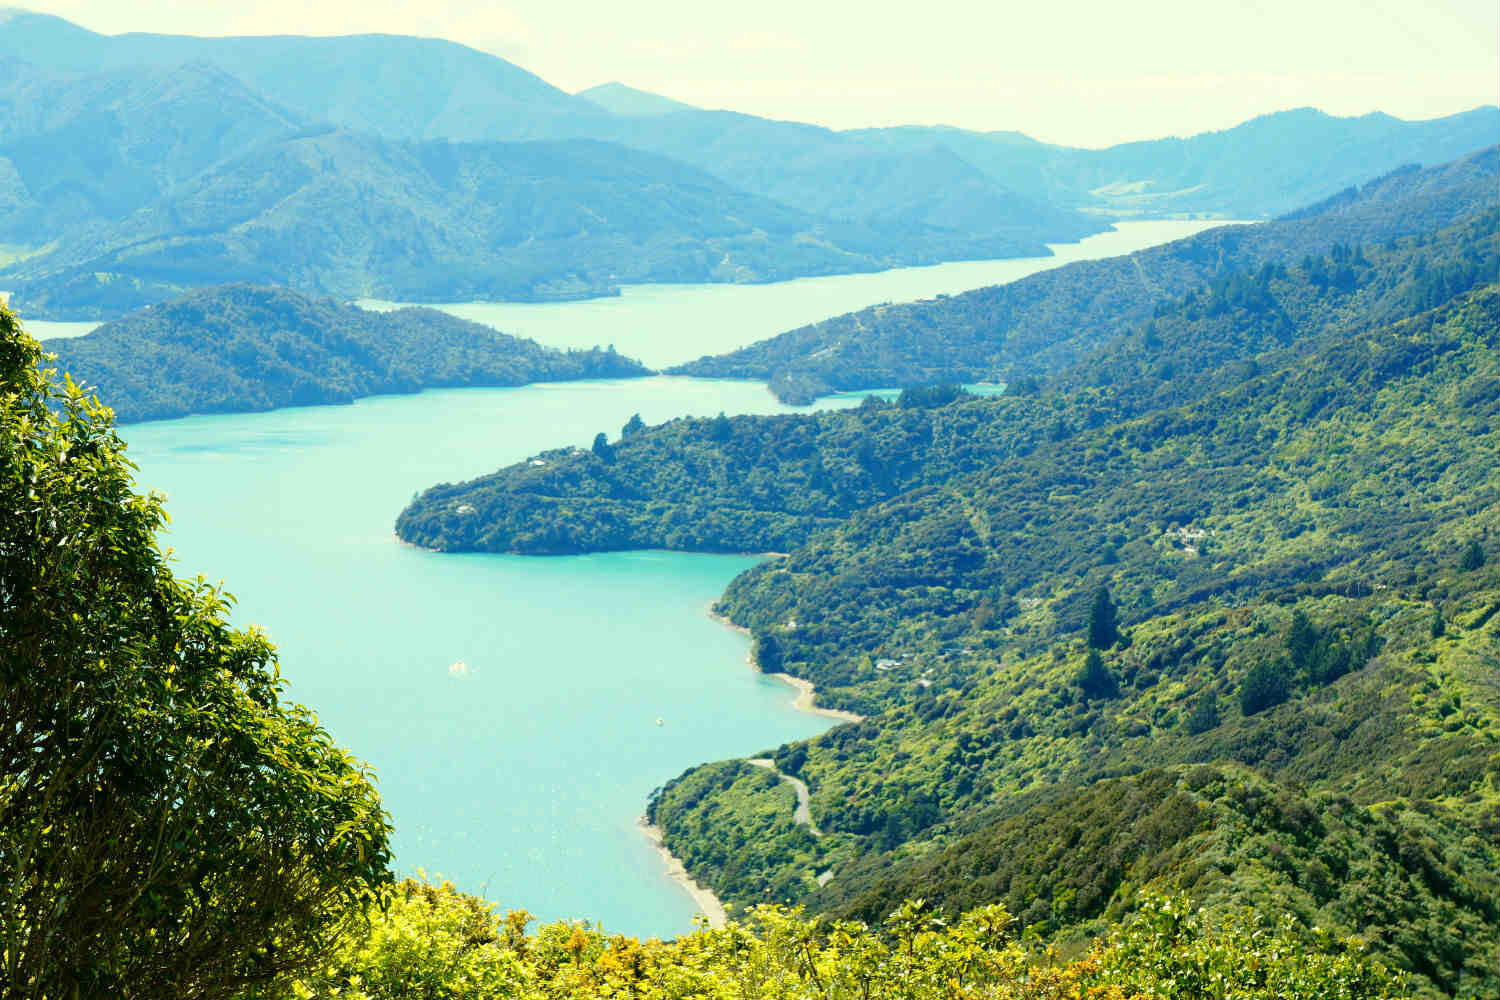 Views from one of the highest points of the Queen Charlotte Track